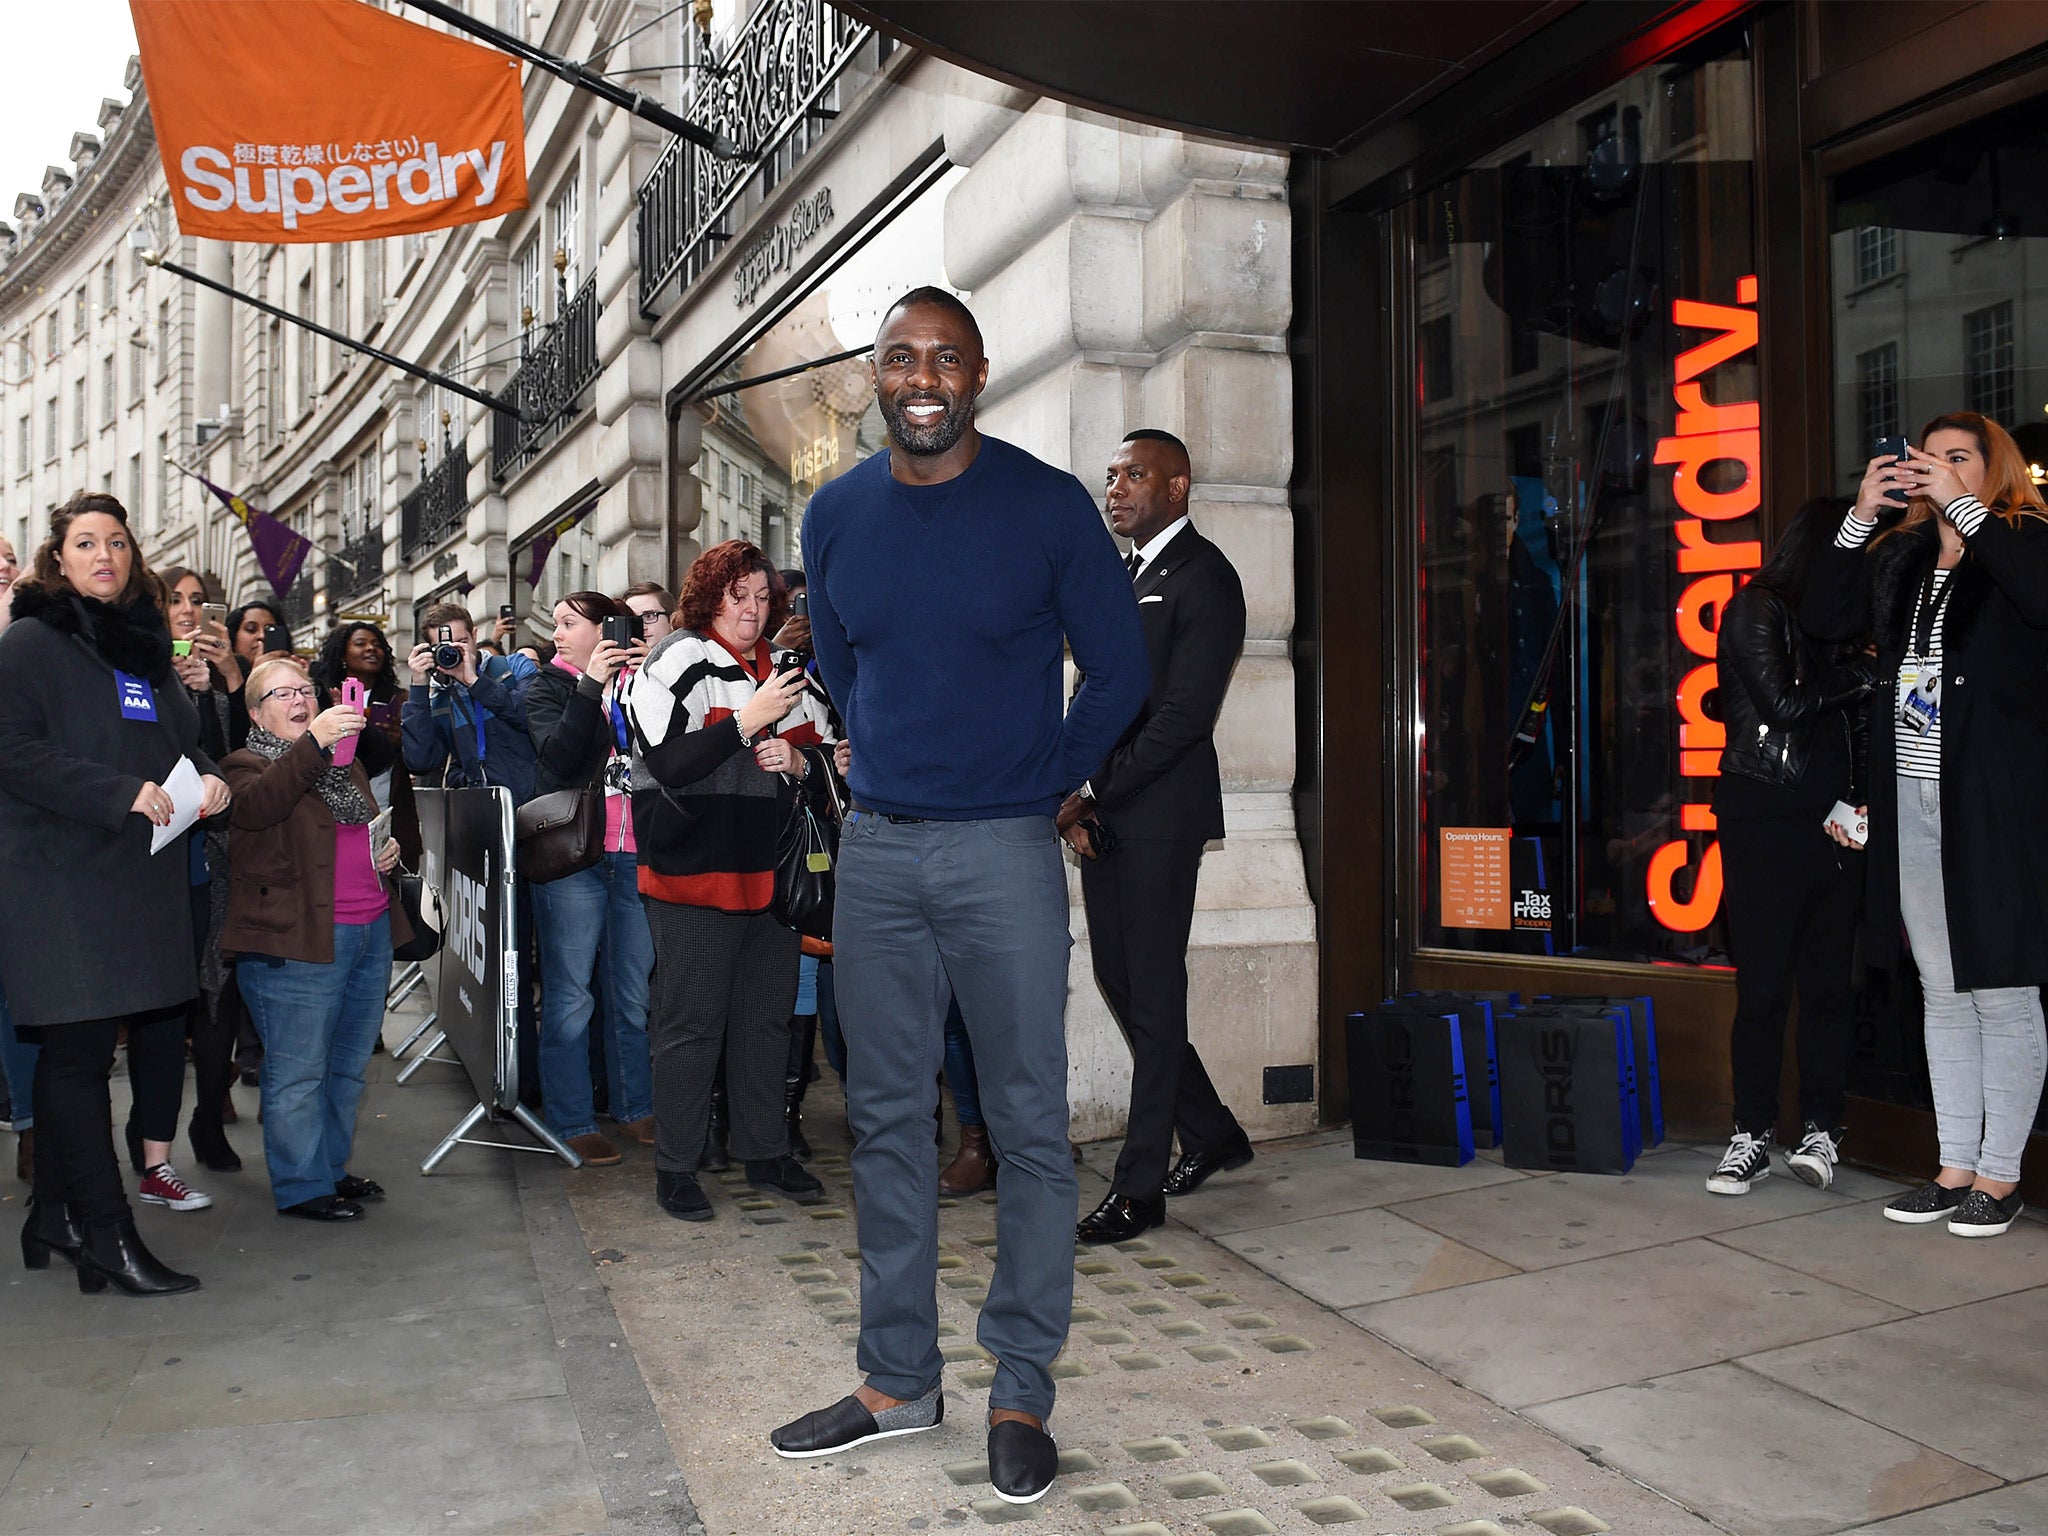 Fans turned out en masse for the Idris Elba launch at a London branch